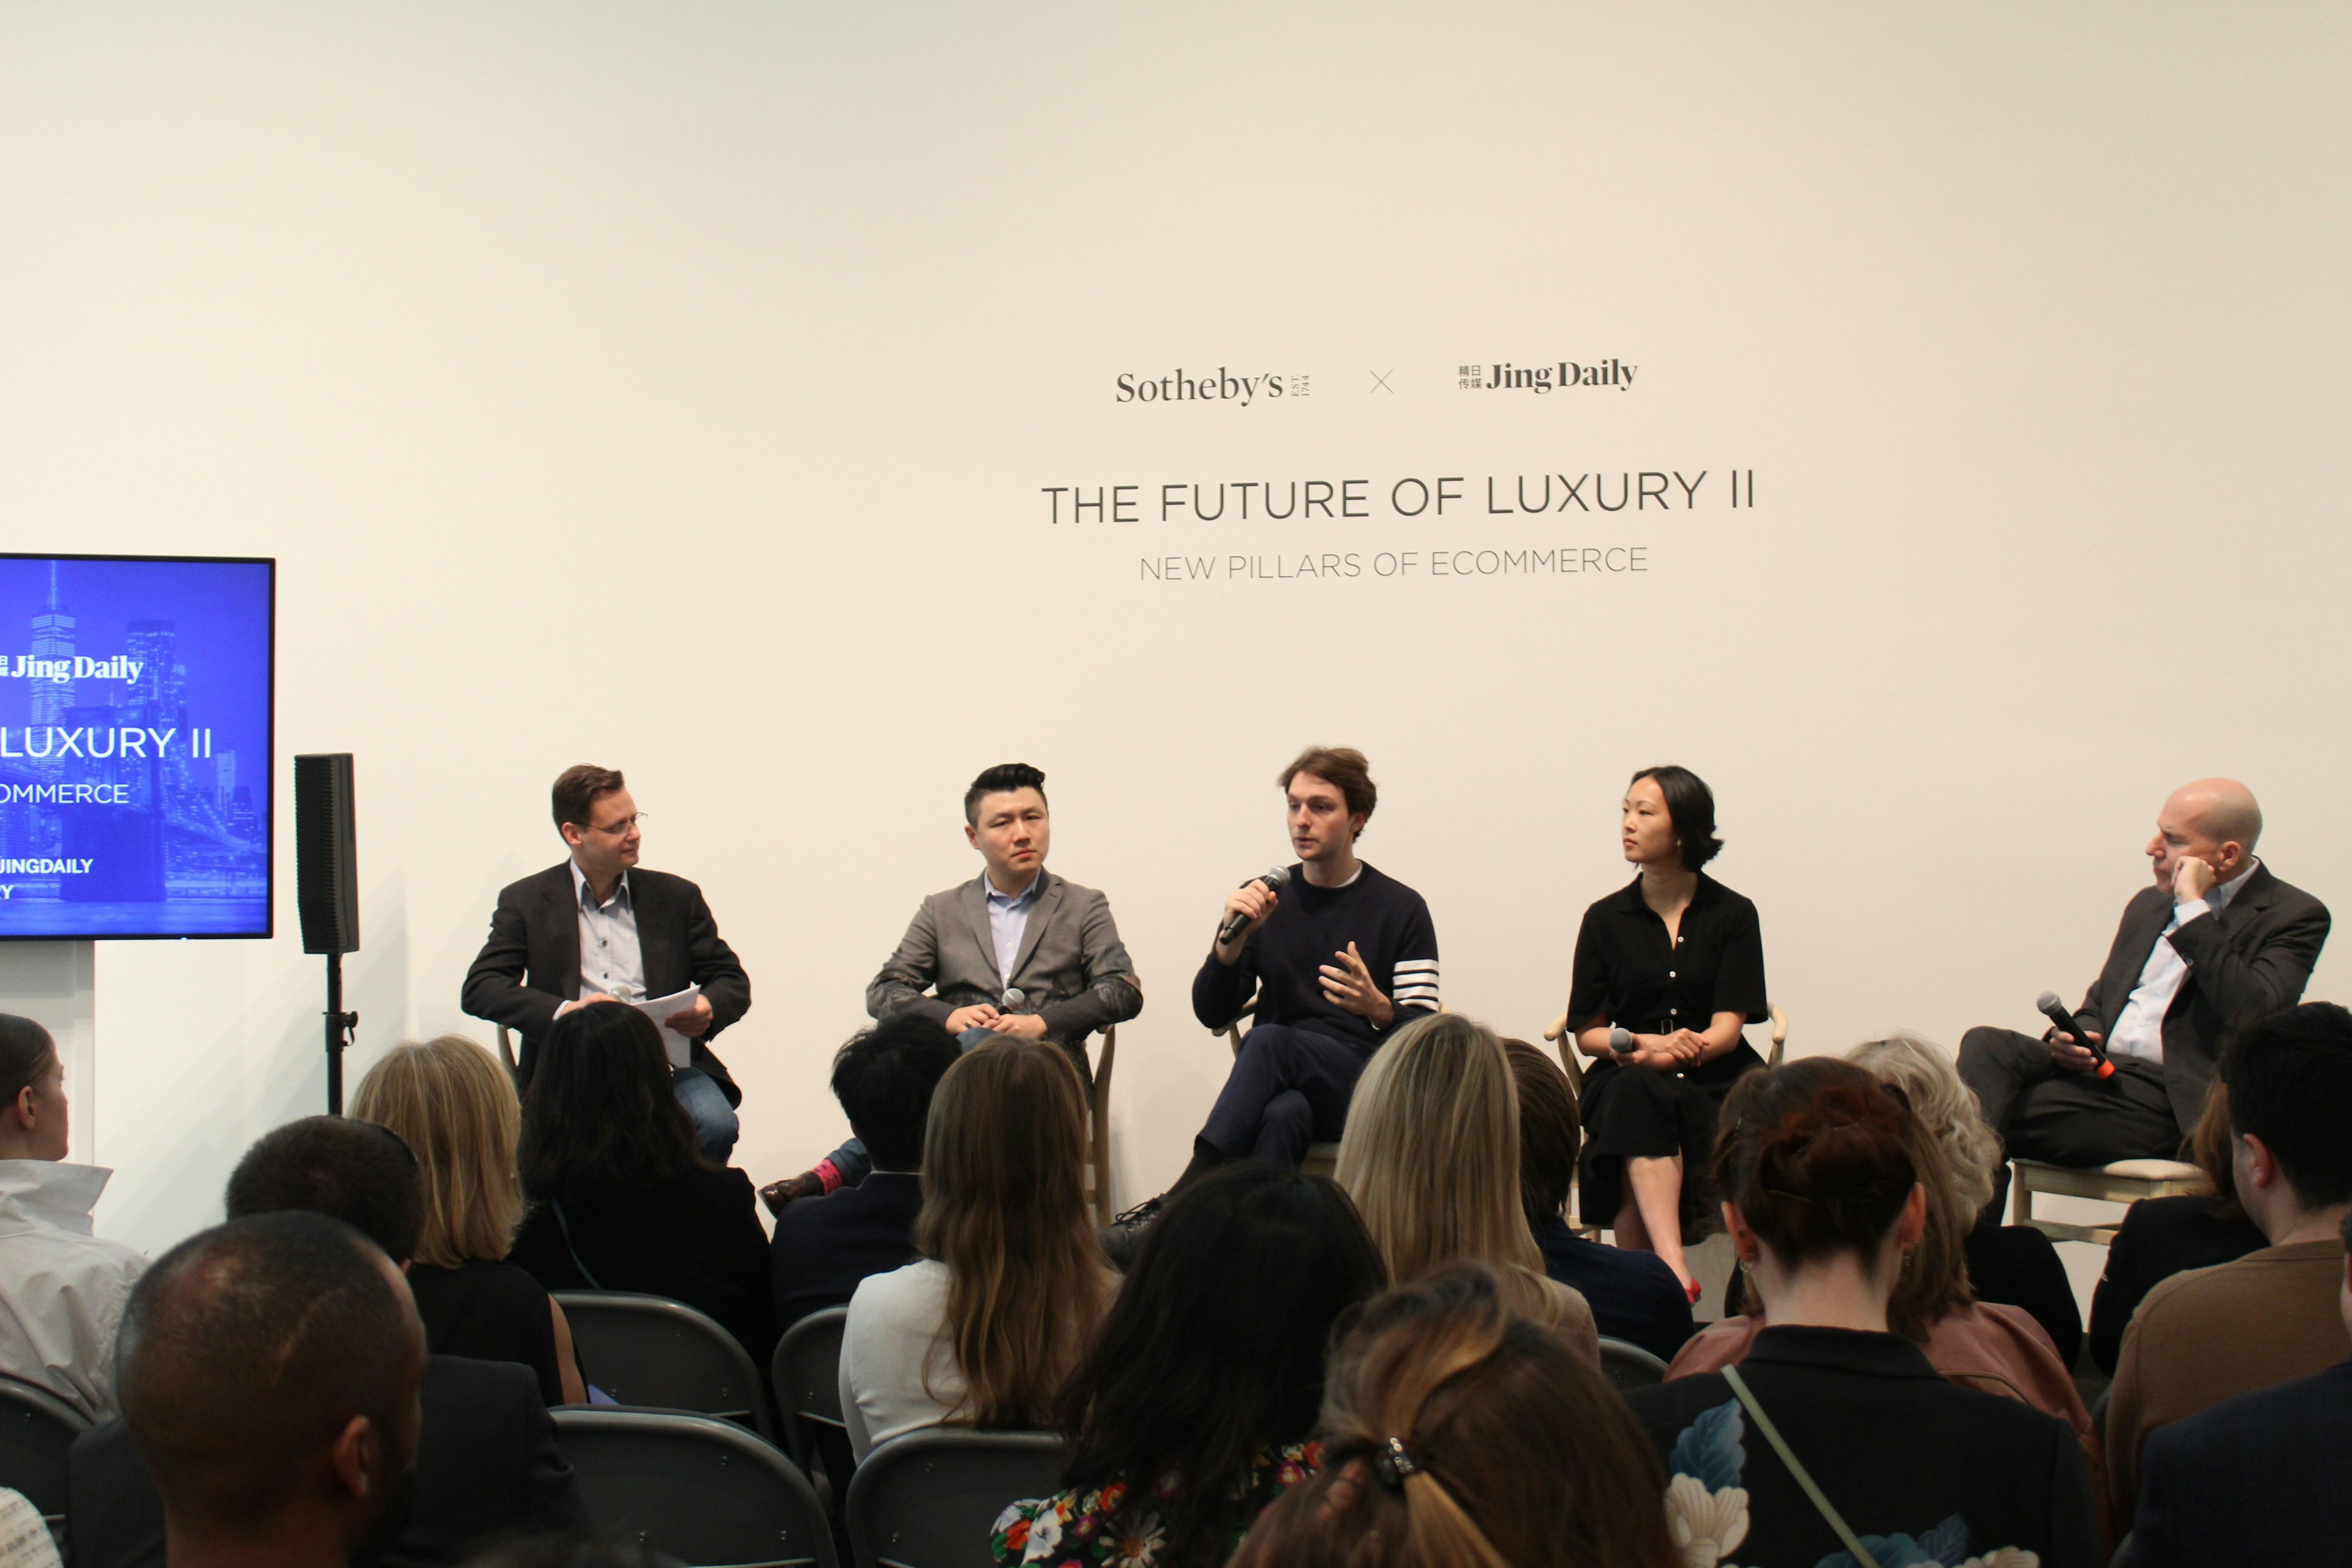 Panel II: The New Landscape of Luxury, moderated by James Eron, Partner of Kung Fu Data, joined by Charlie Gu, Founder of Kollective Influence, Noah Wunsch, Senior Vice-President, Global Head of eCommerce, Sotheby’s, Emma Chiu, Creative Innovation Director, Wunderman Thompson Intelligence, and Michael Rock, Founder of 2x4. Photo: Ruonan Zheng